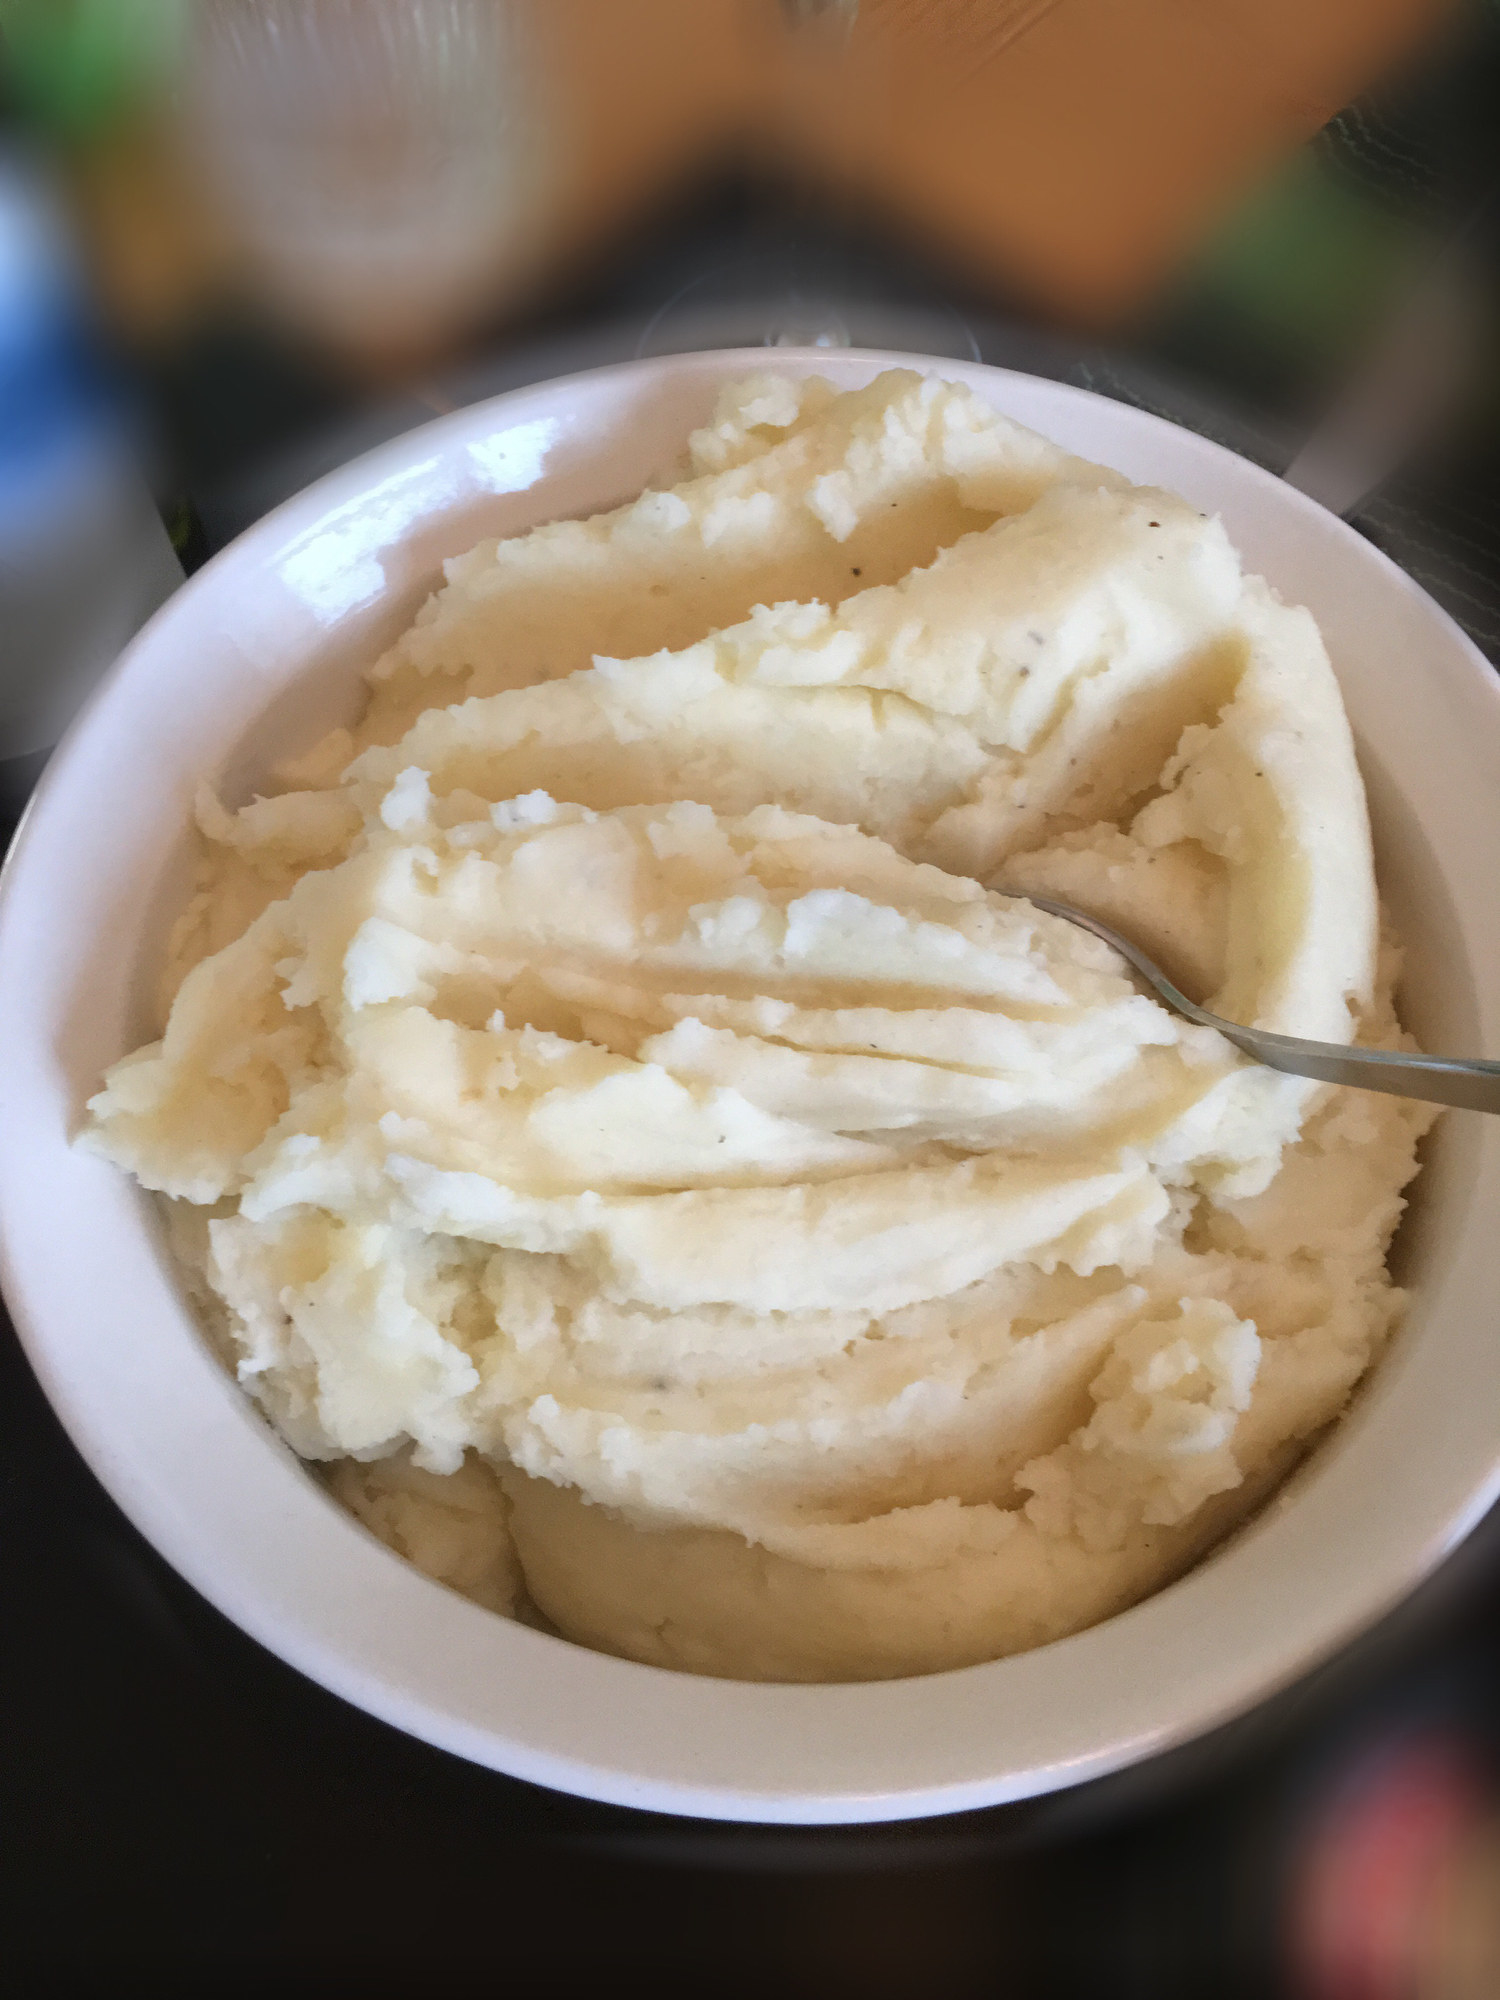 A bowl of creamy mashed potatoes